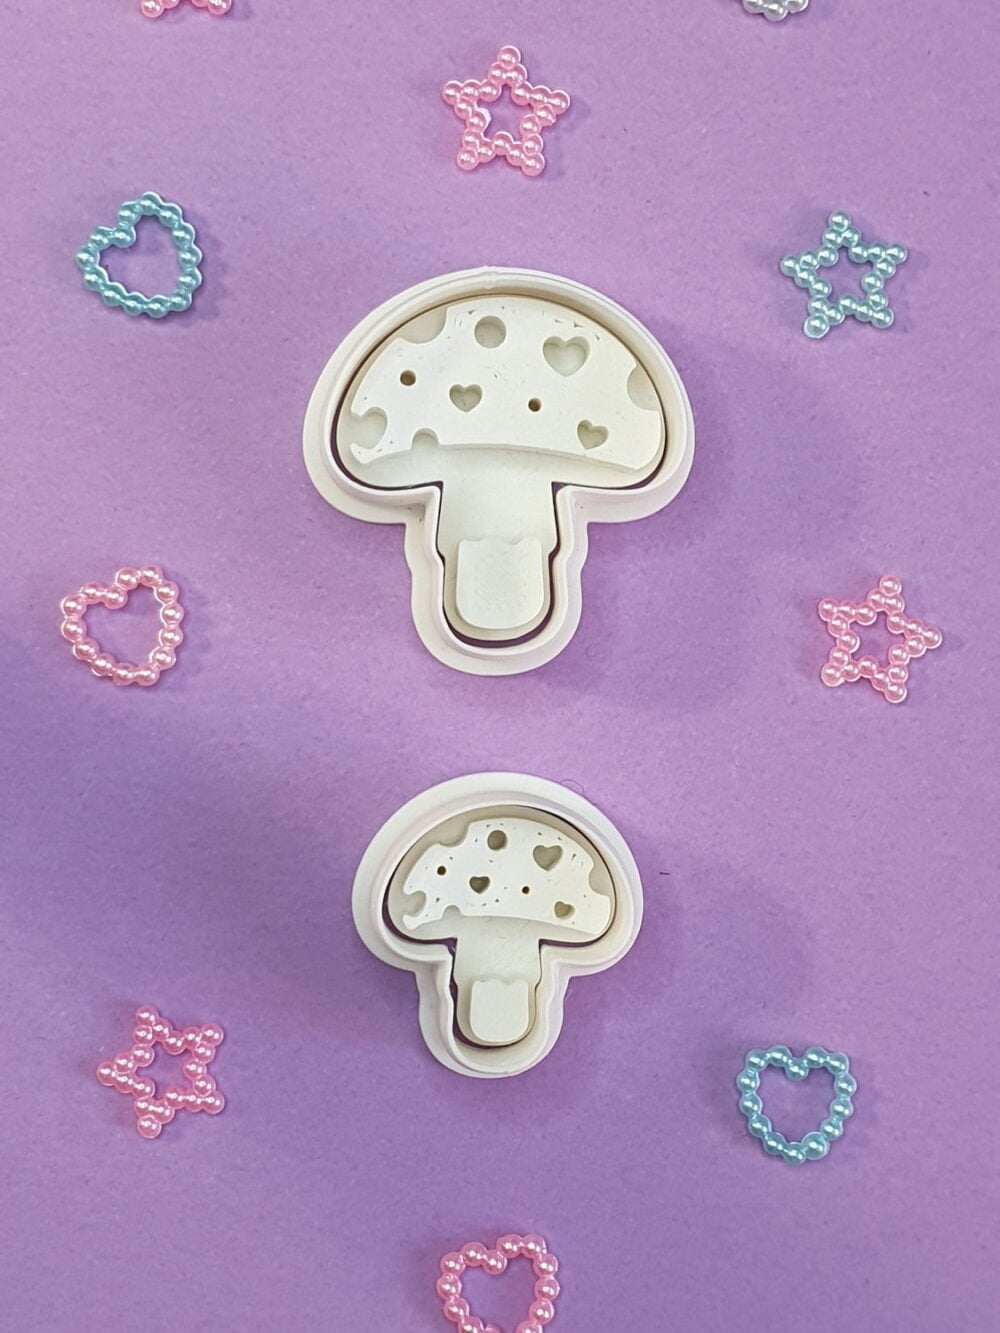 mushroom clay cutter and stamp for polymer clay